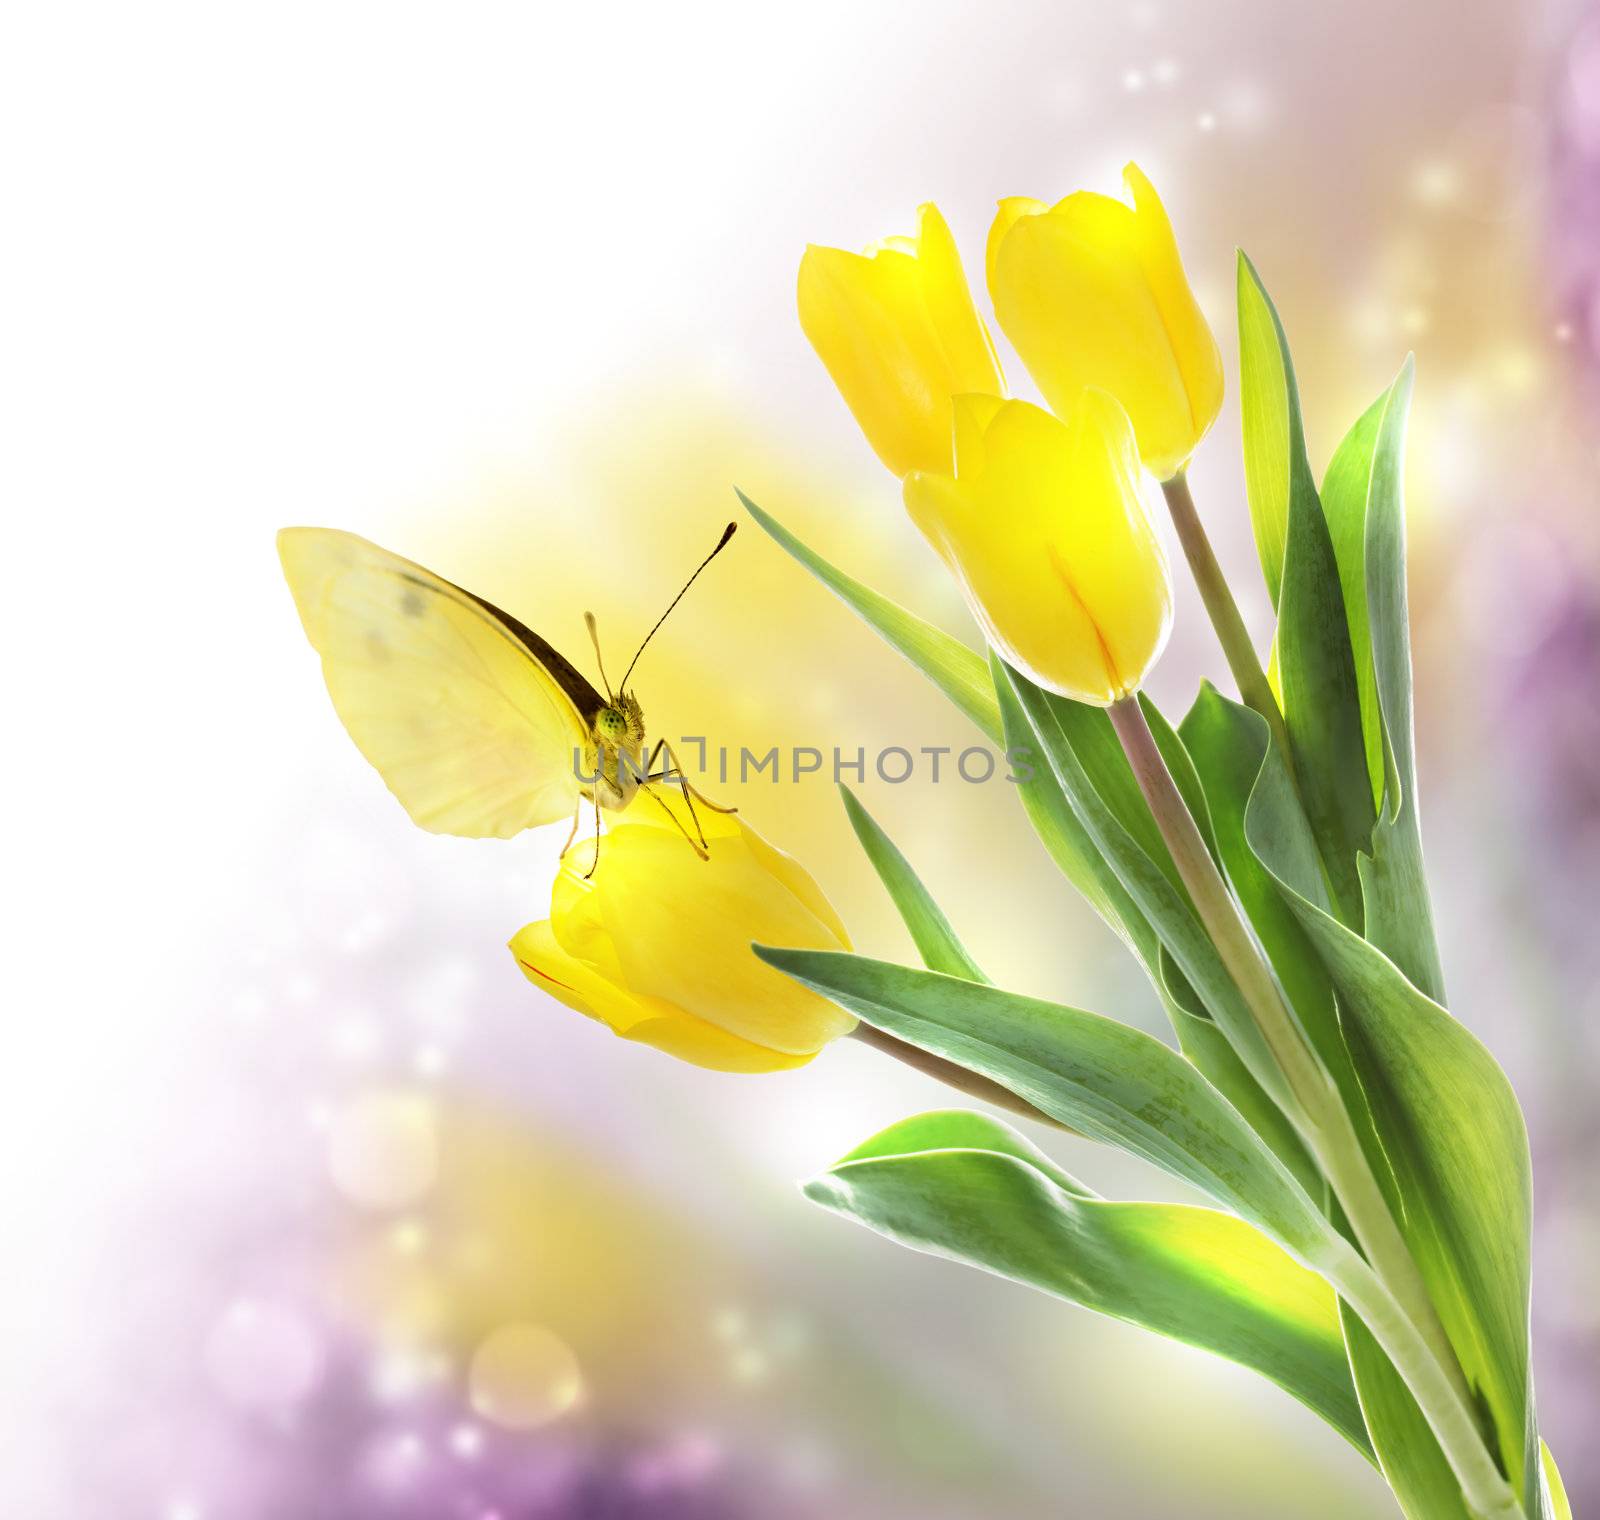 Yellow Tulips with a Butterfly  by melpomene